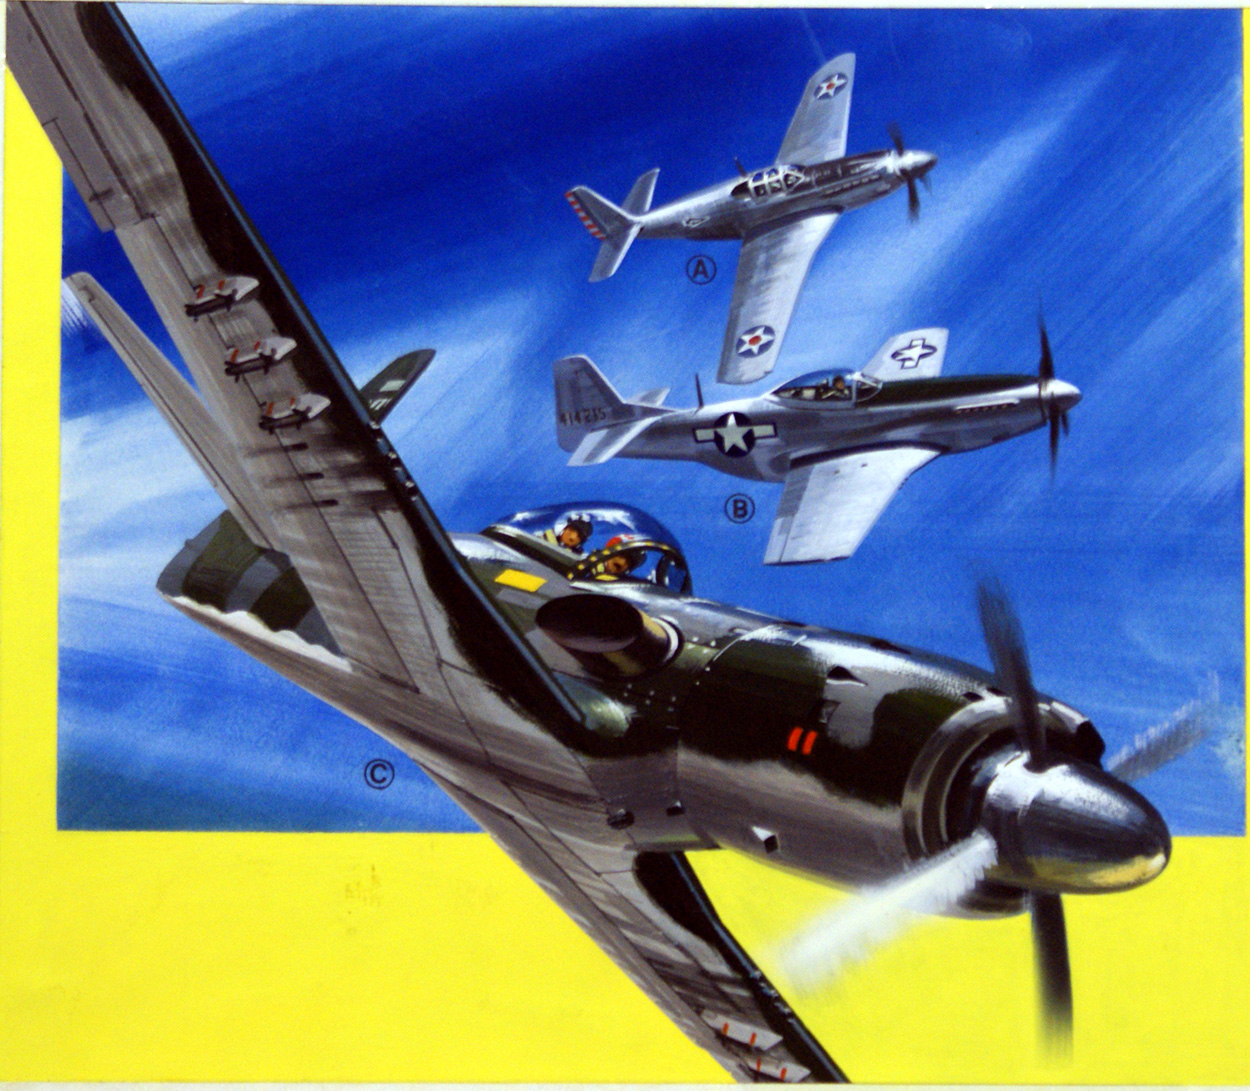 Mustang P-51 (Original) art by Air (Wilf Hardy) at The Illustration Art Gallery